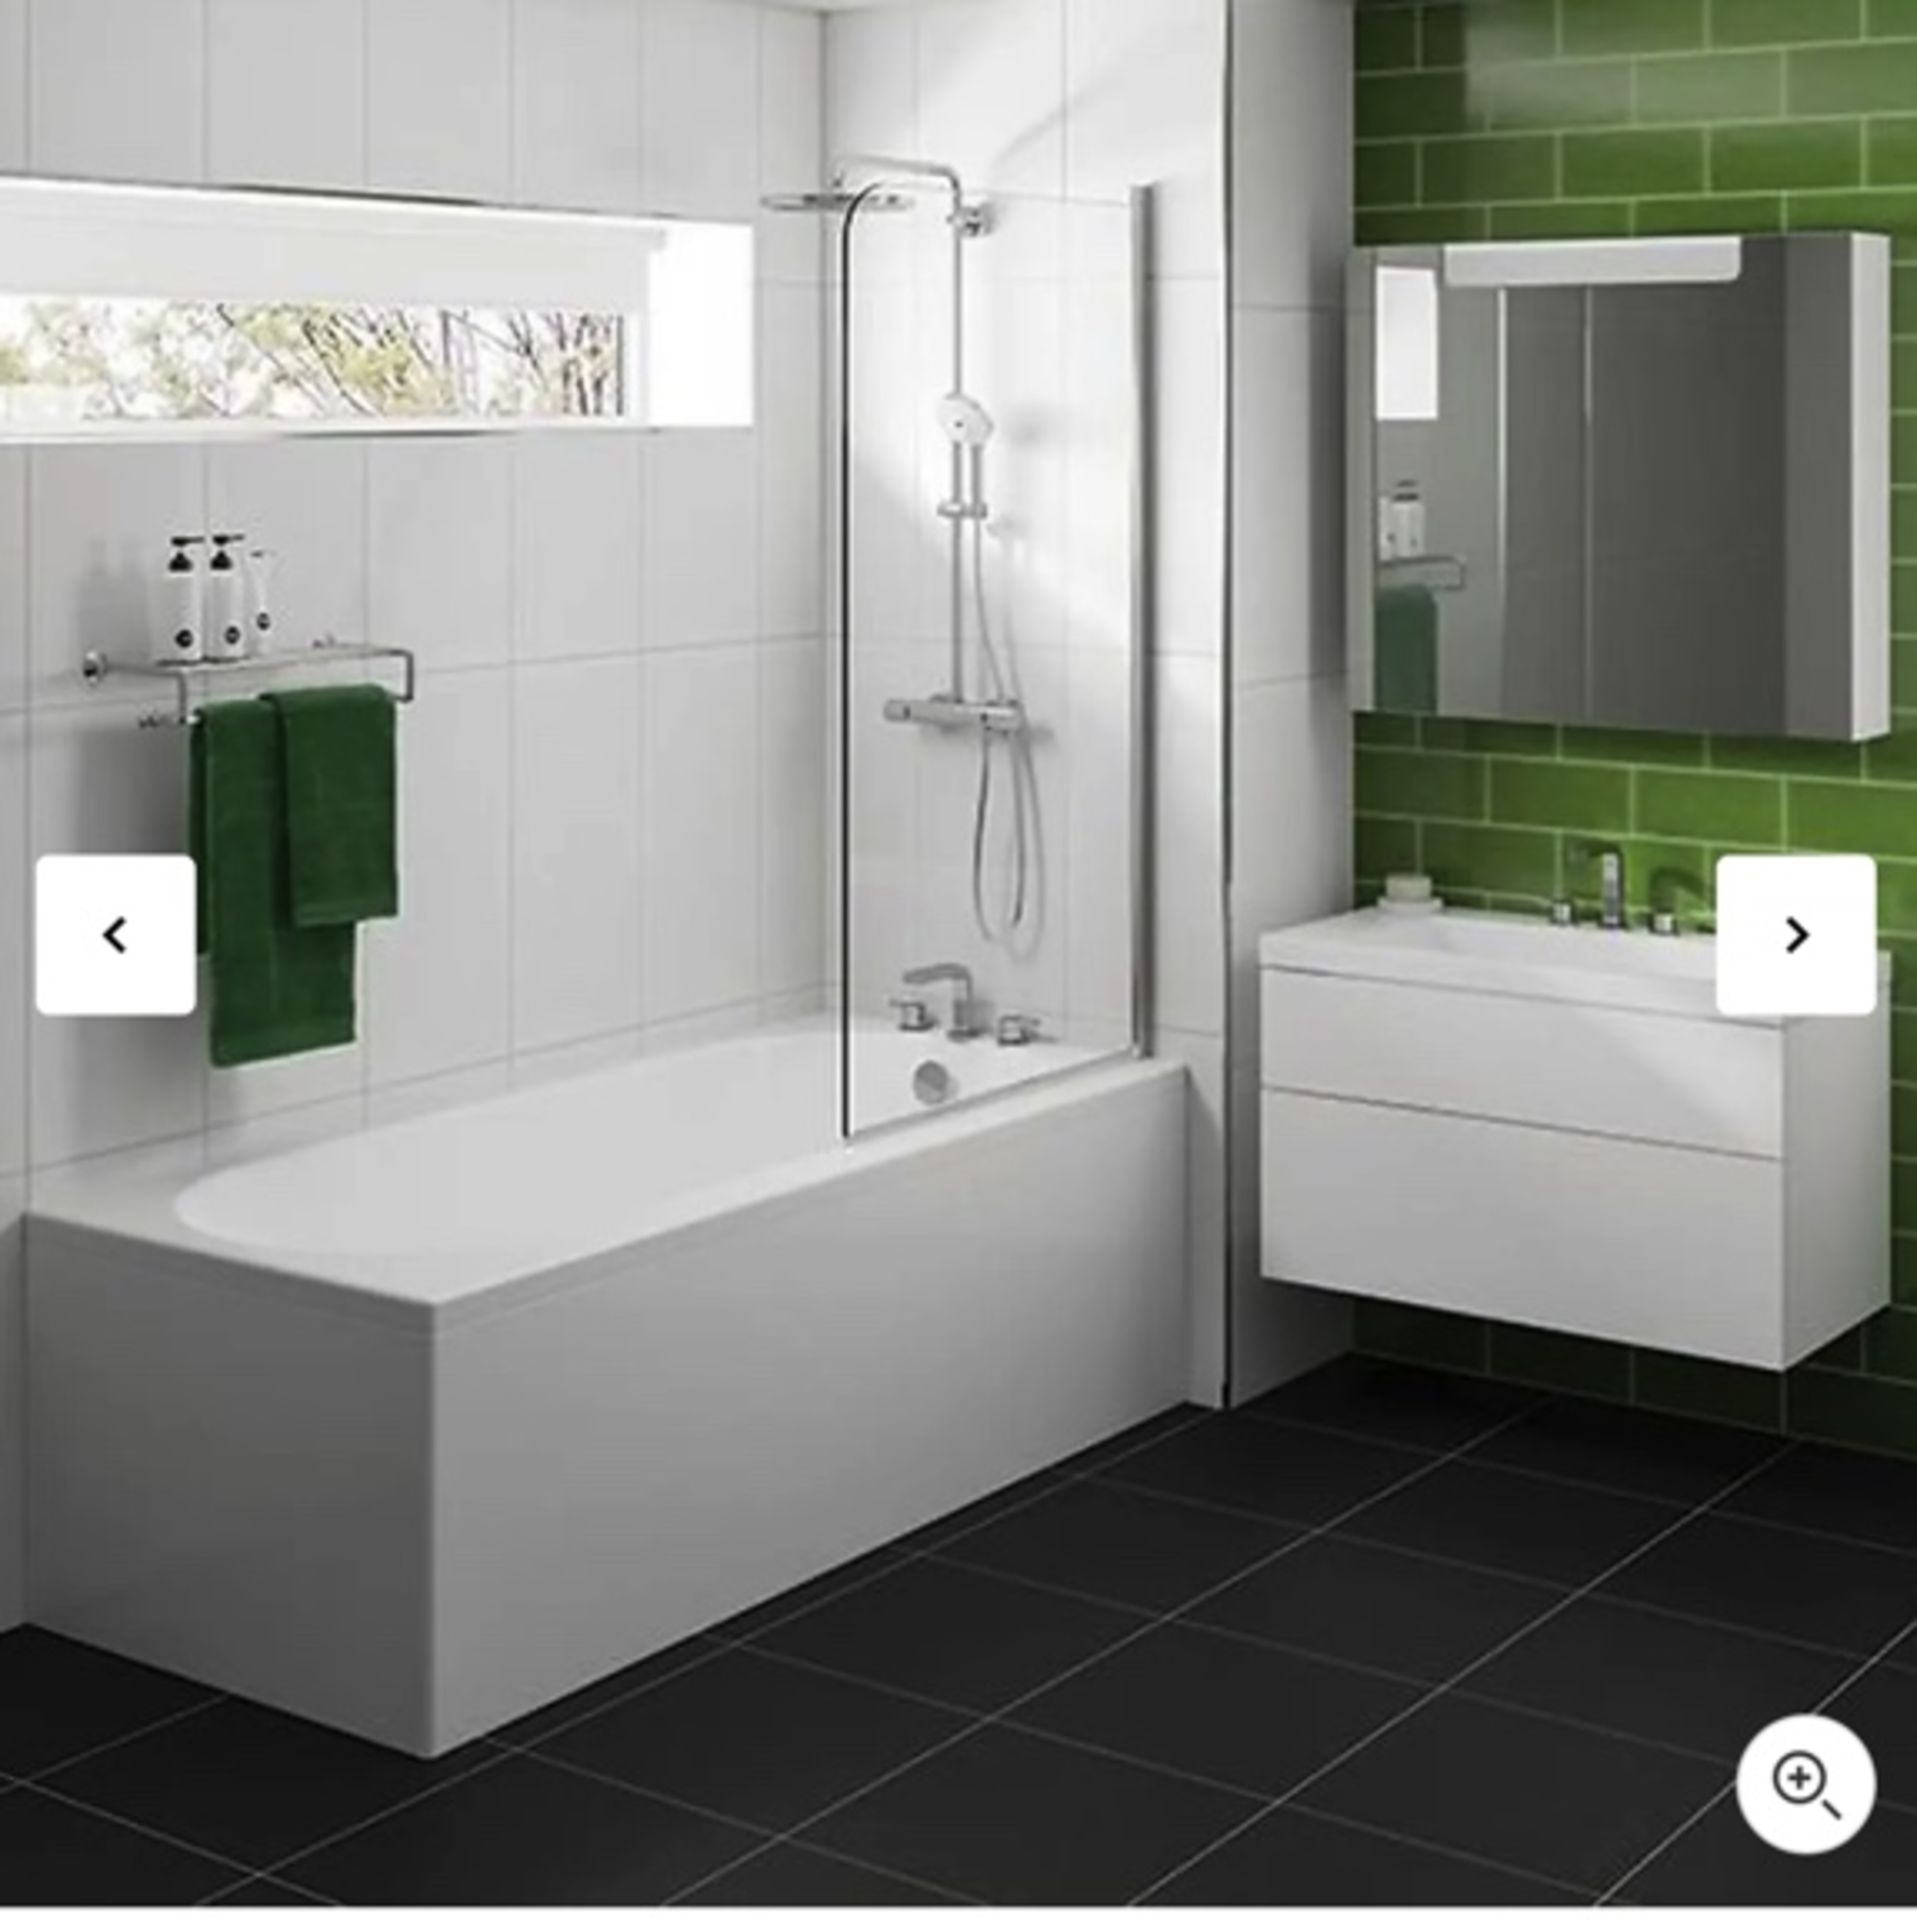 Brand New Colorado White Single Ended Straight Bath 1600 x 700mm RRP £210 **No Vat**